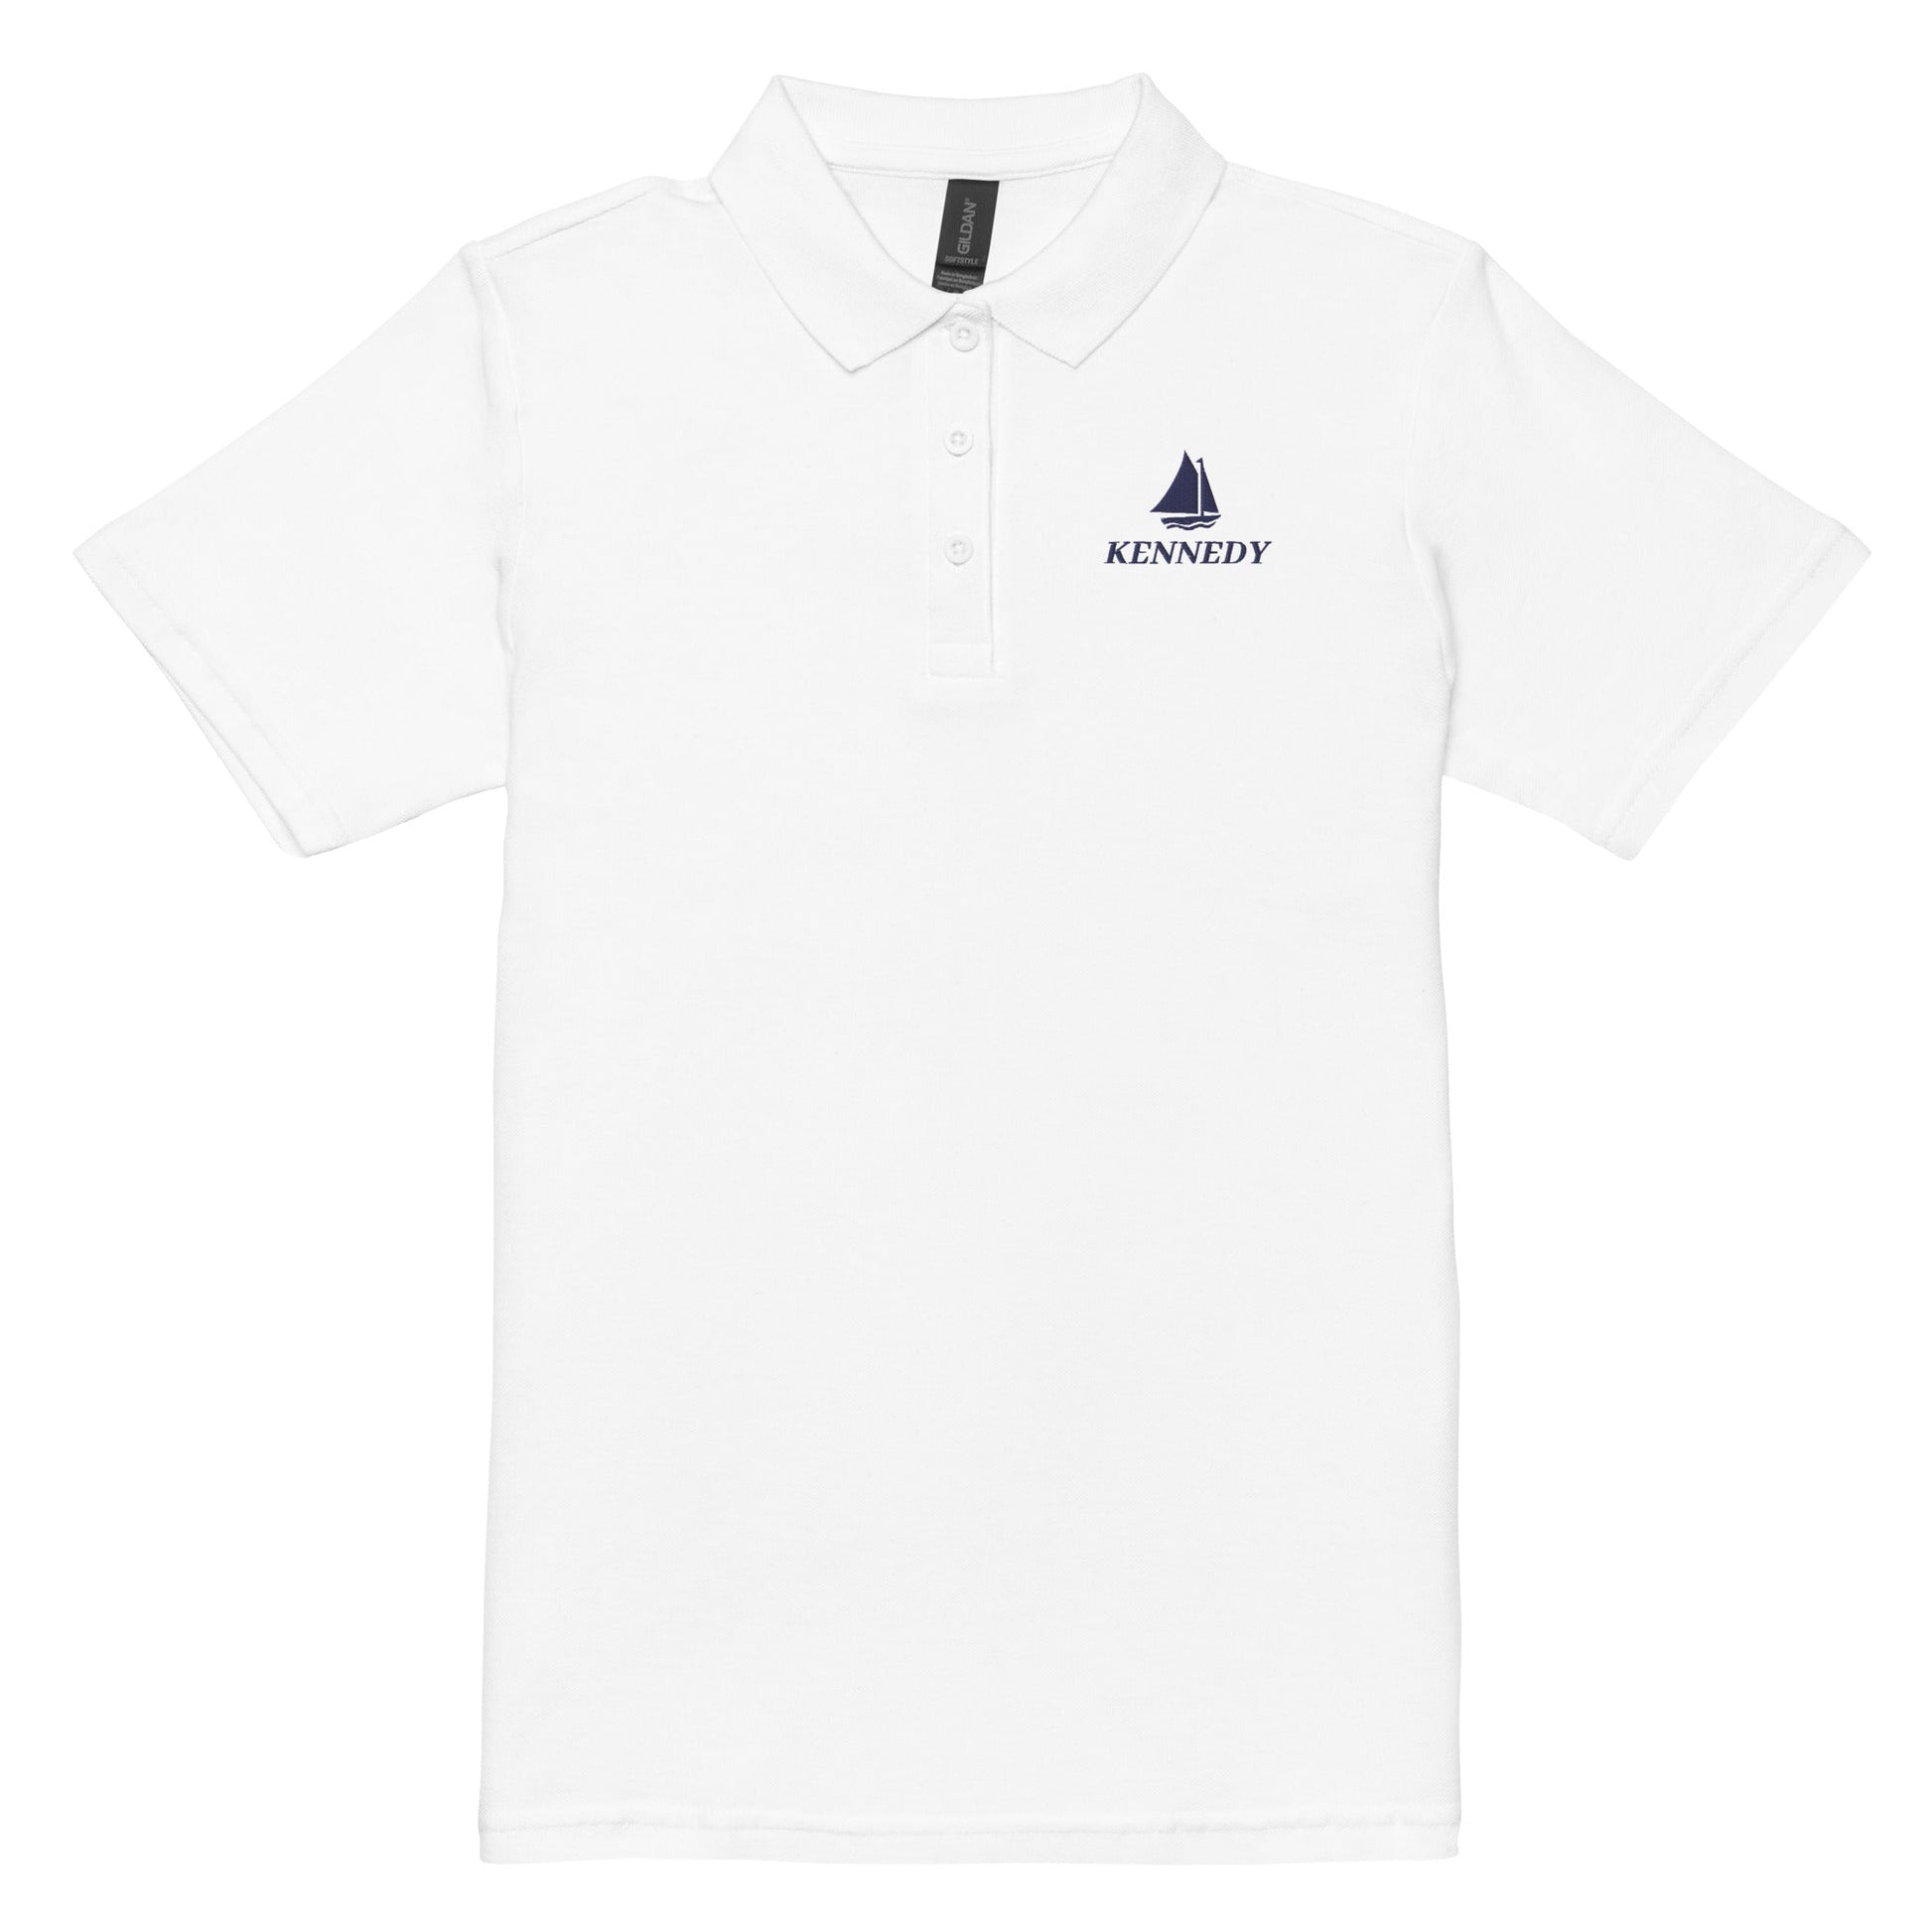 The Resolute Women’s Embroidered Polo - TEAM KENNEDY. All rights reserved